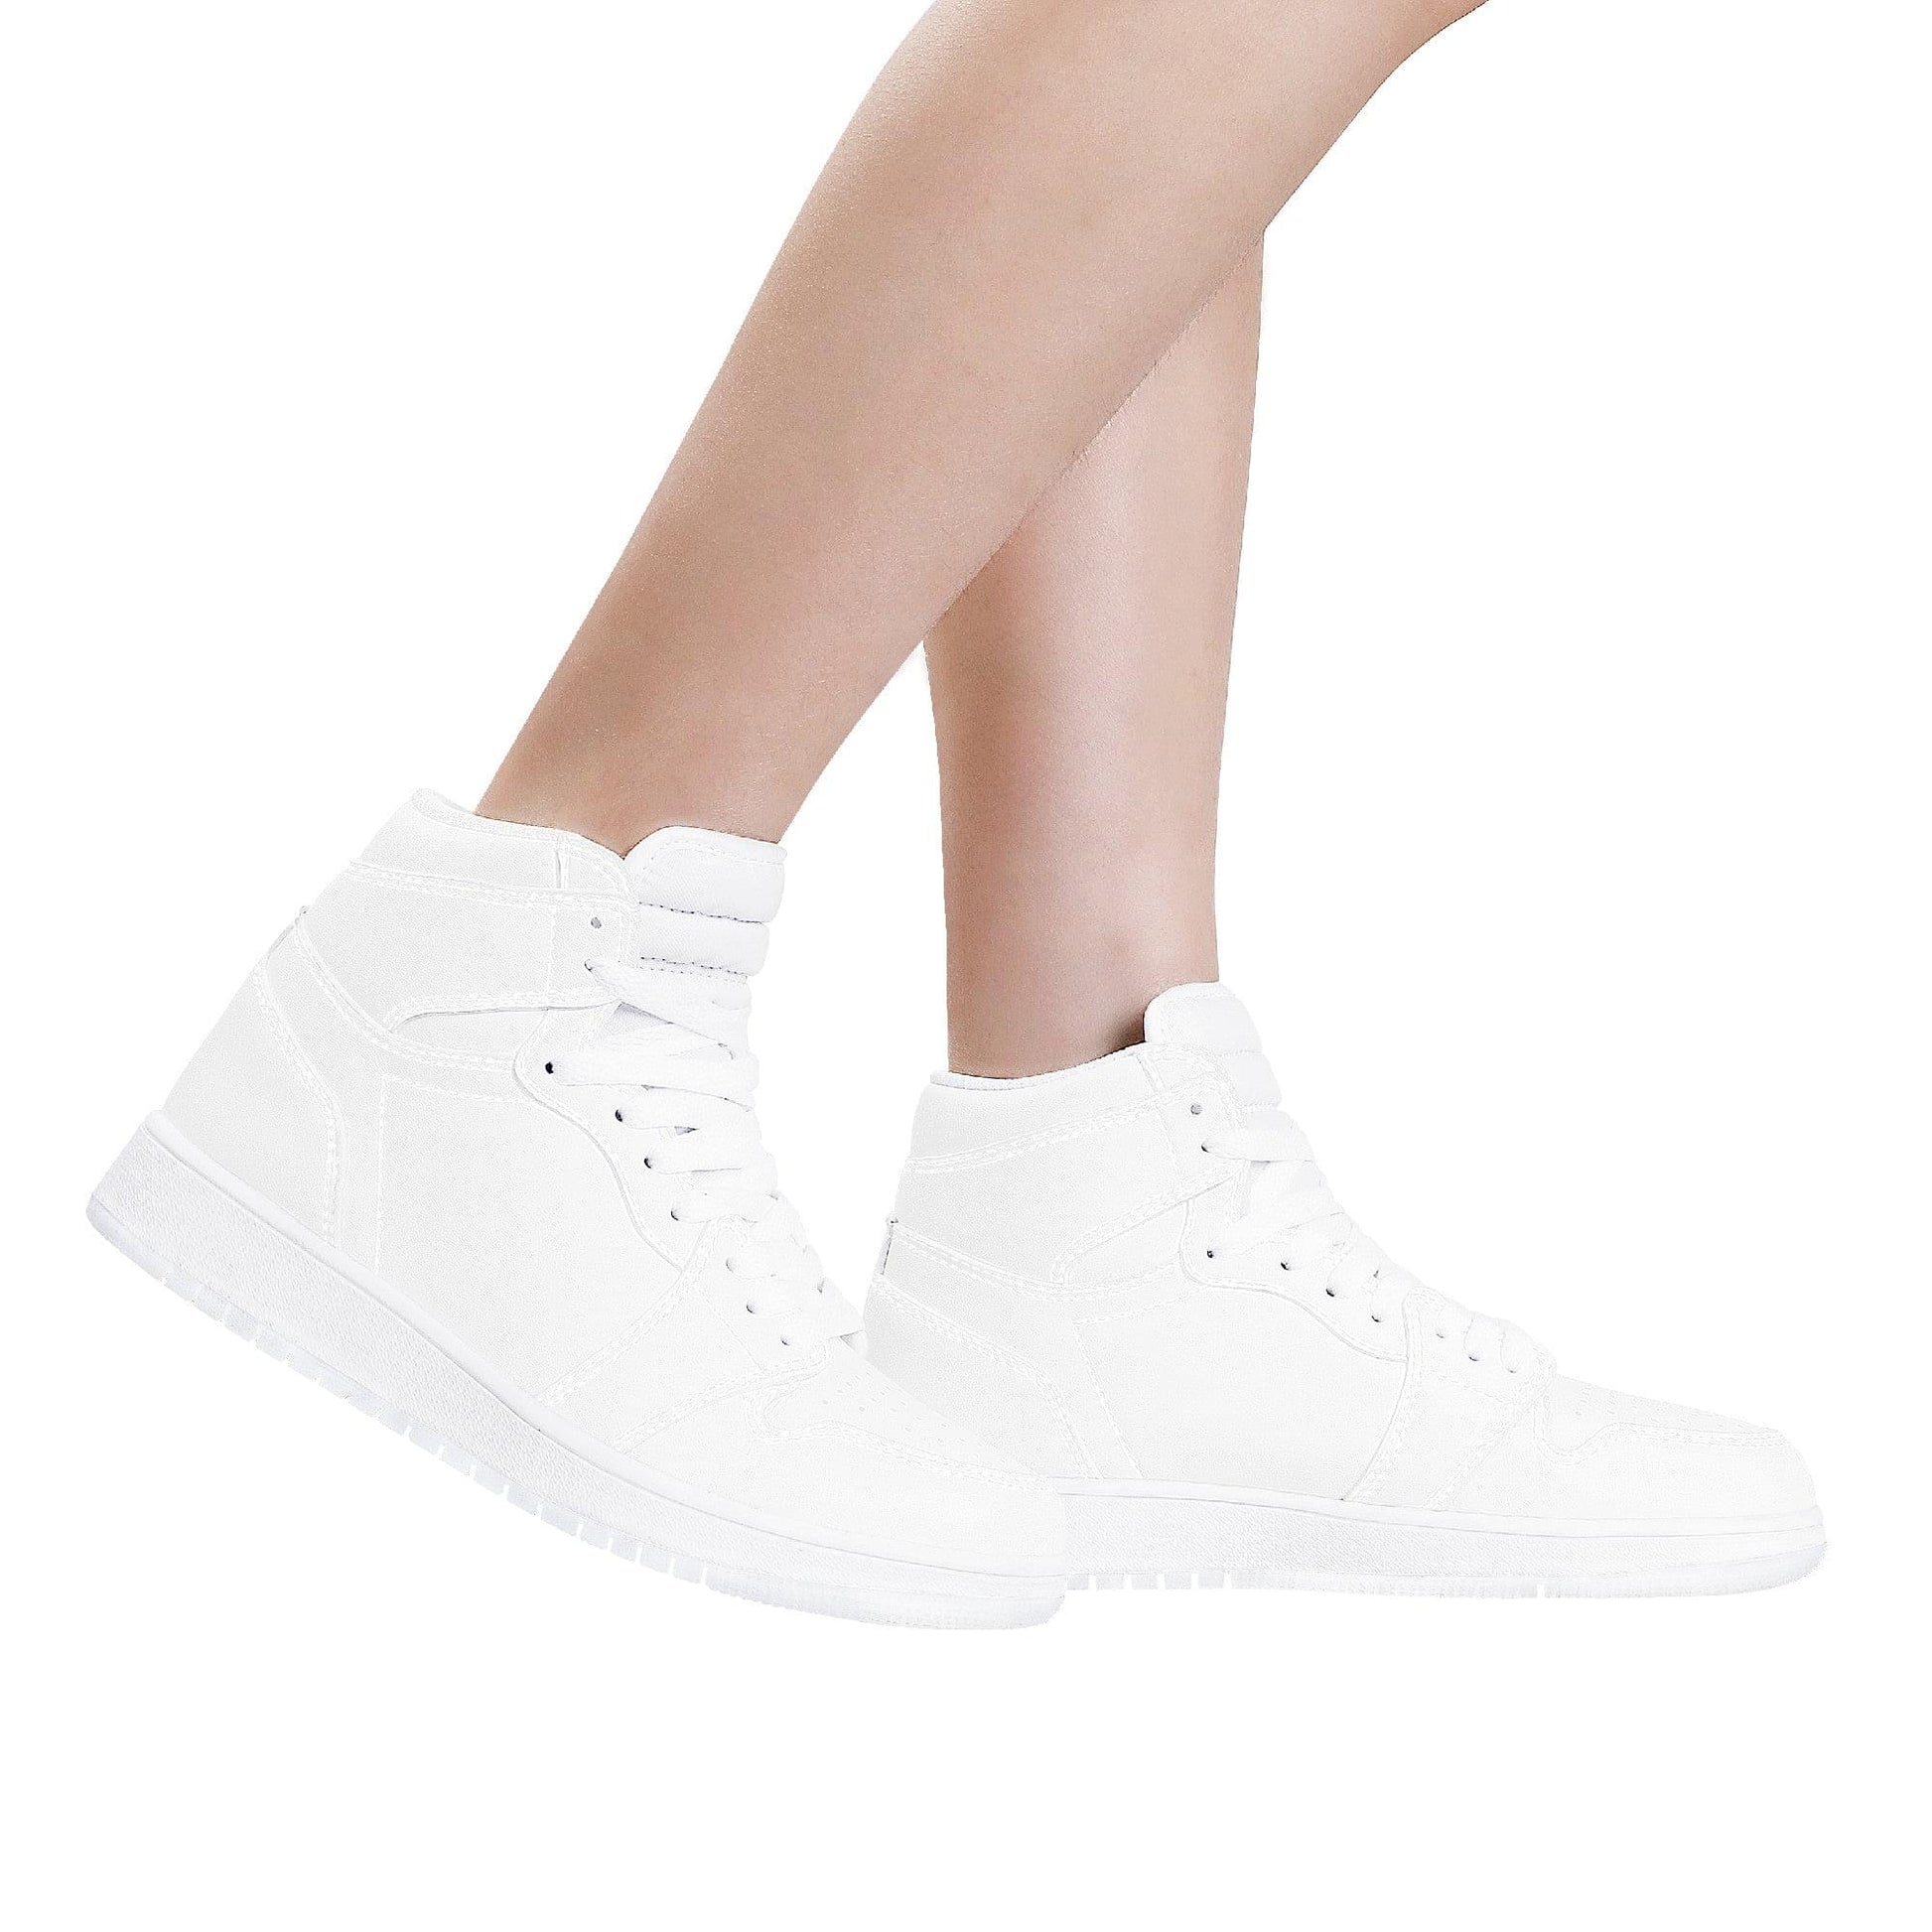 Custom High Top Sneakers Leather -White D17 Colloid Colors 